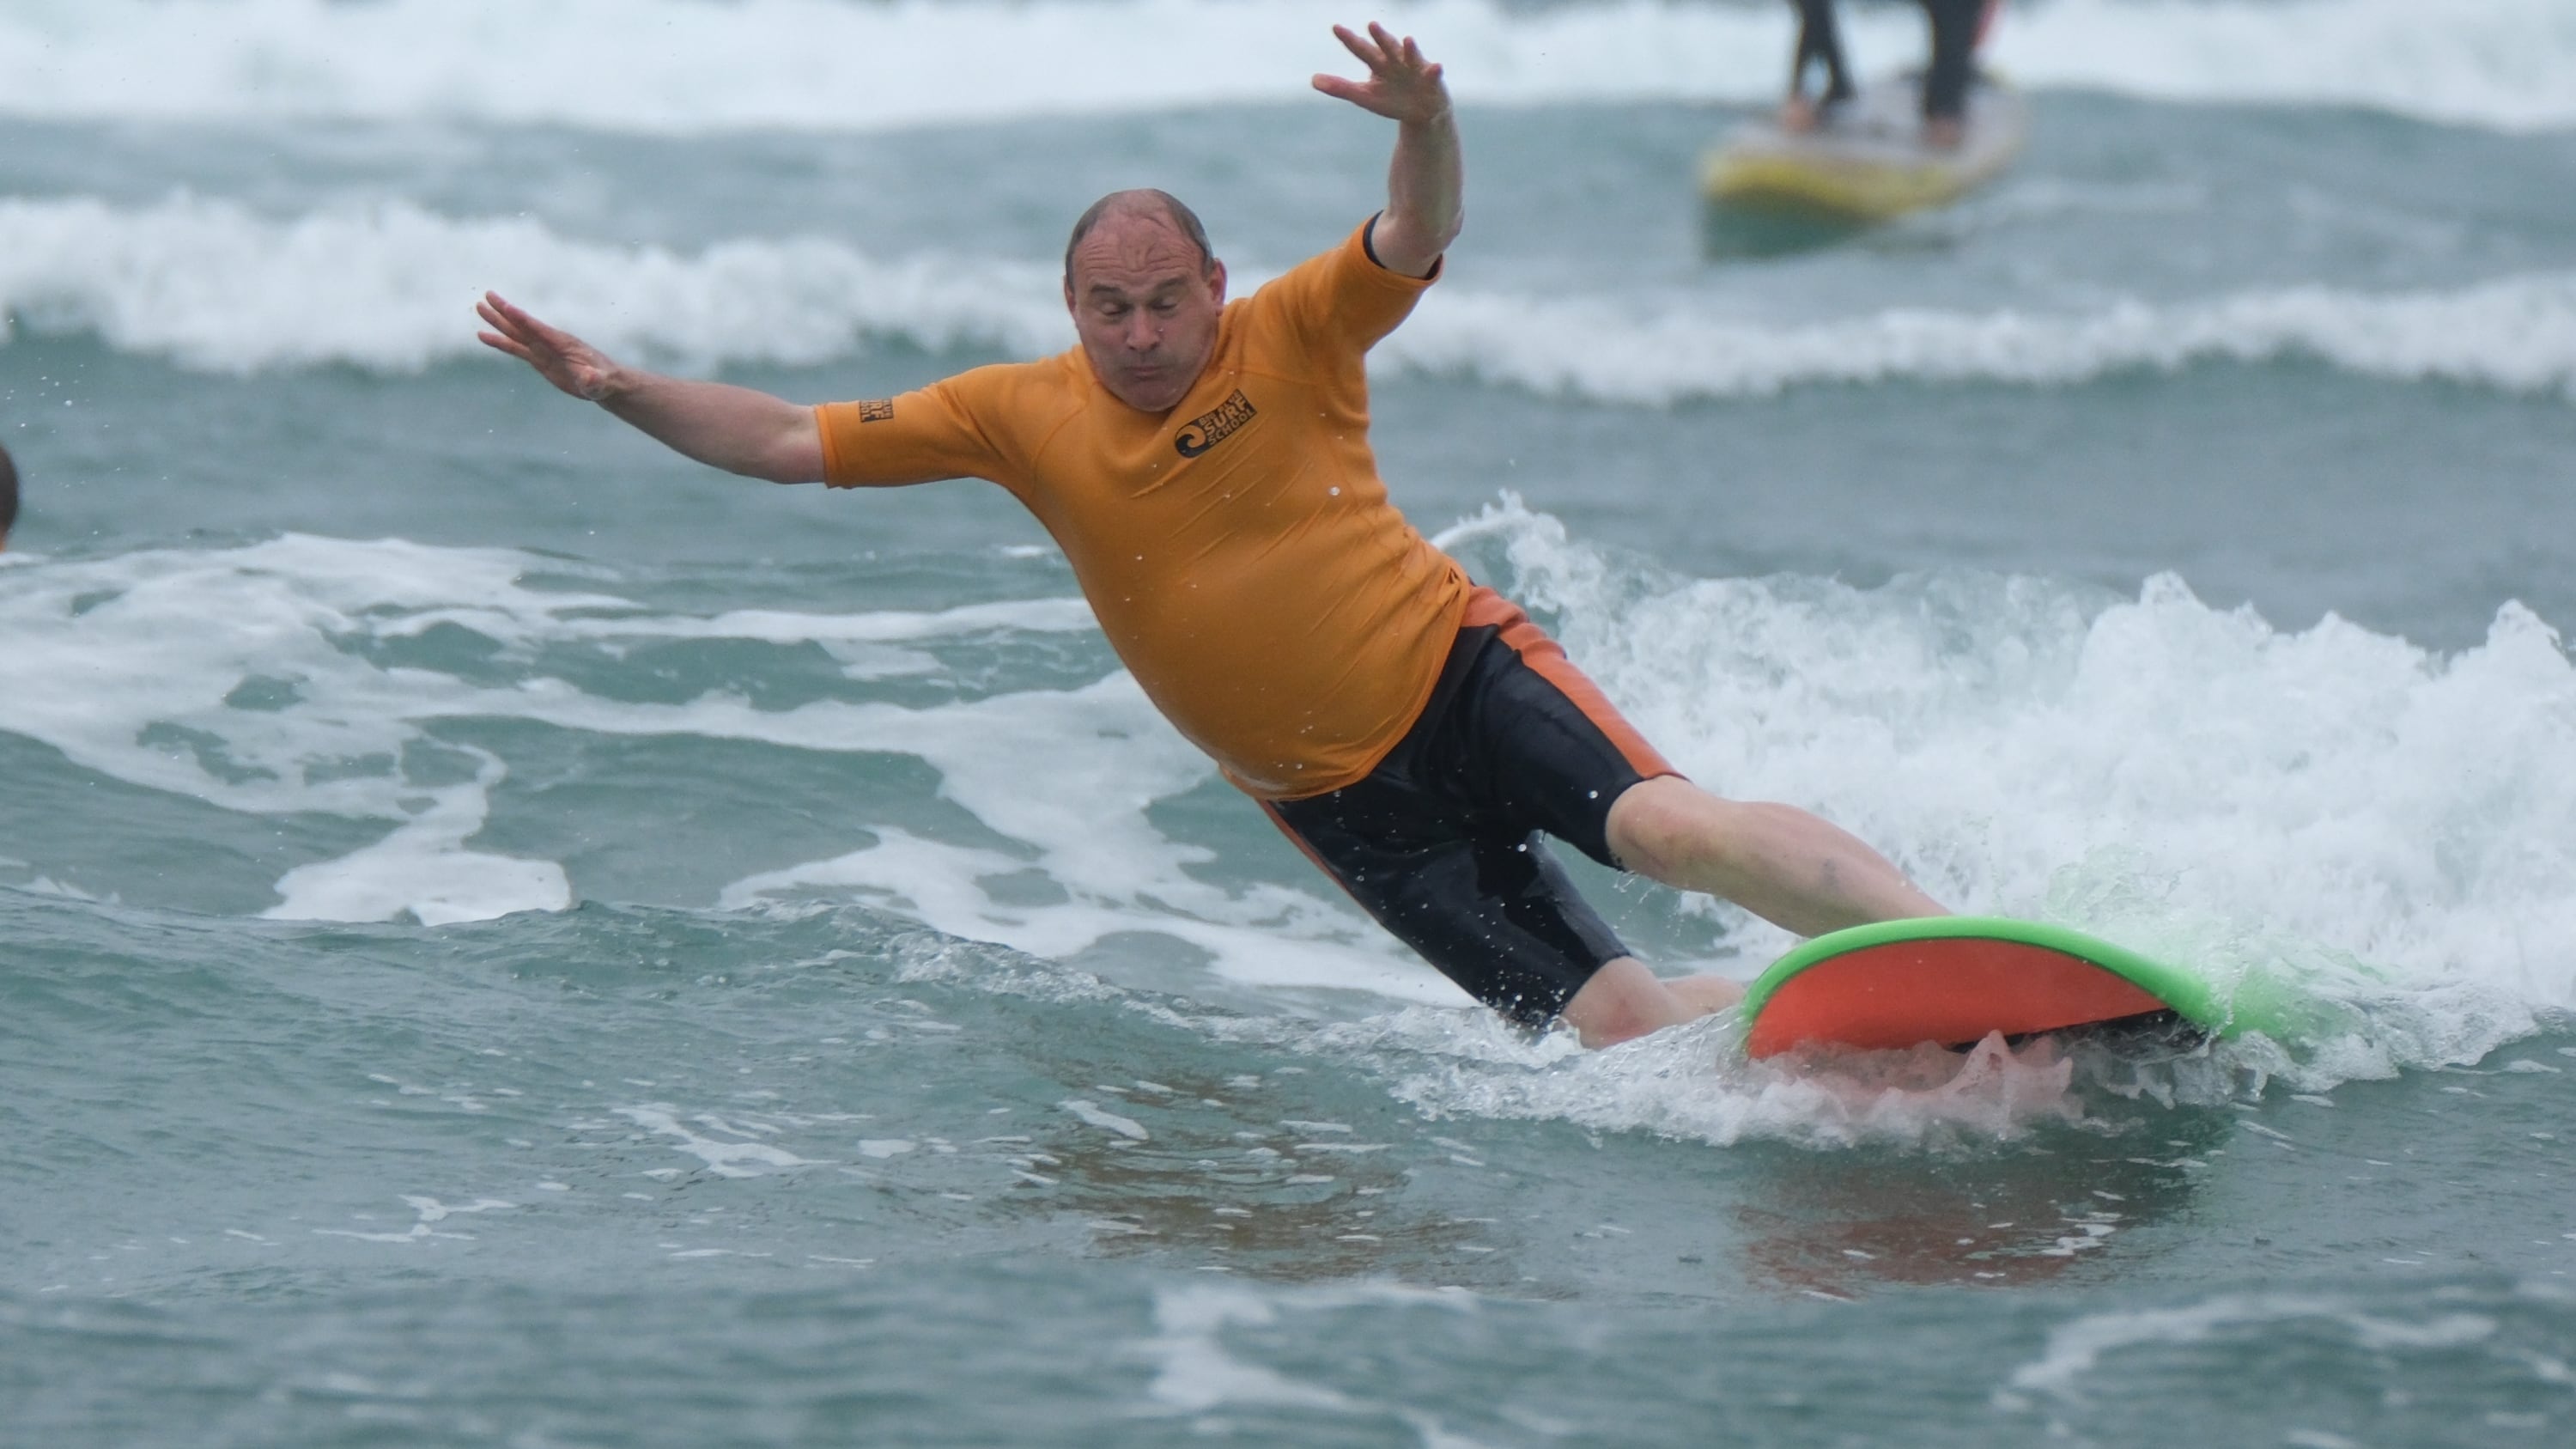 Liberal Democrat leader Sir Ed Davey falls from a surfboard during a visit to Big Blue Surf School in Bude, Cornwall